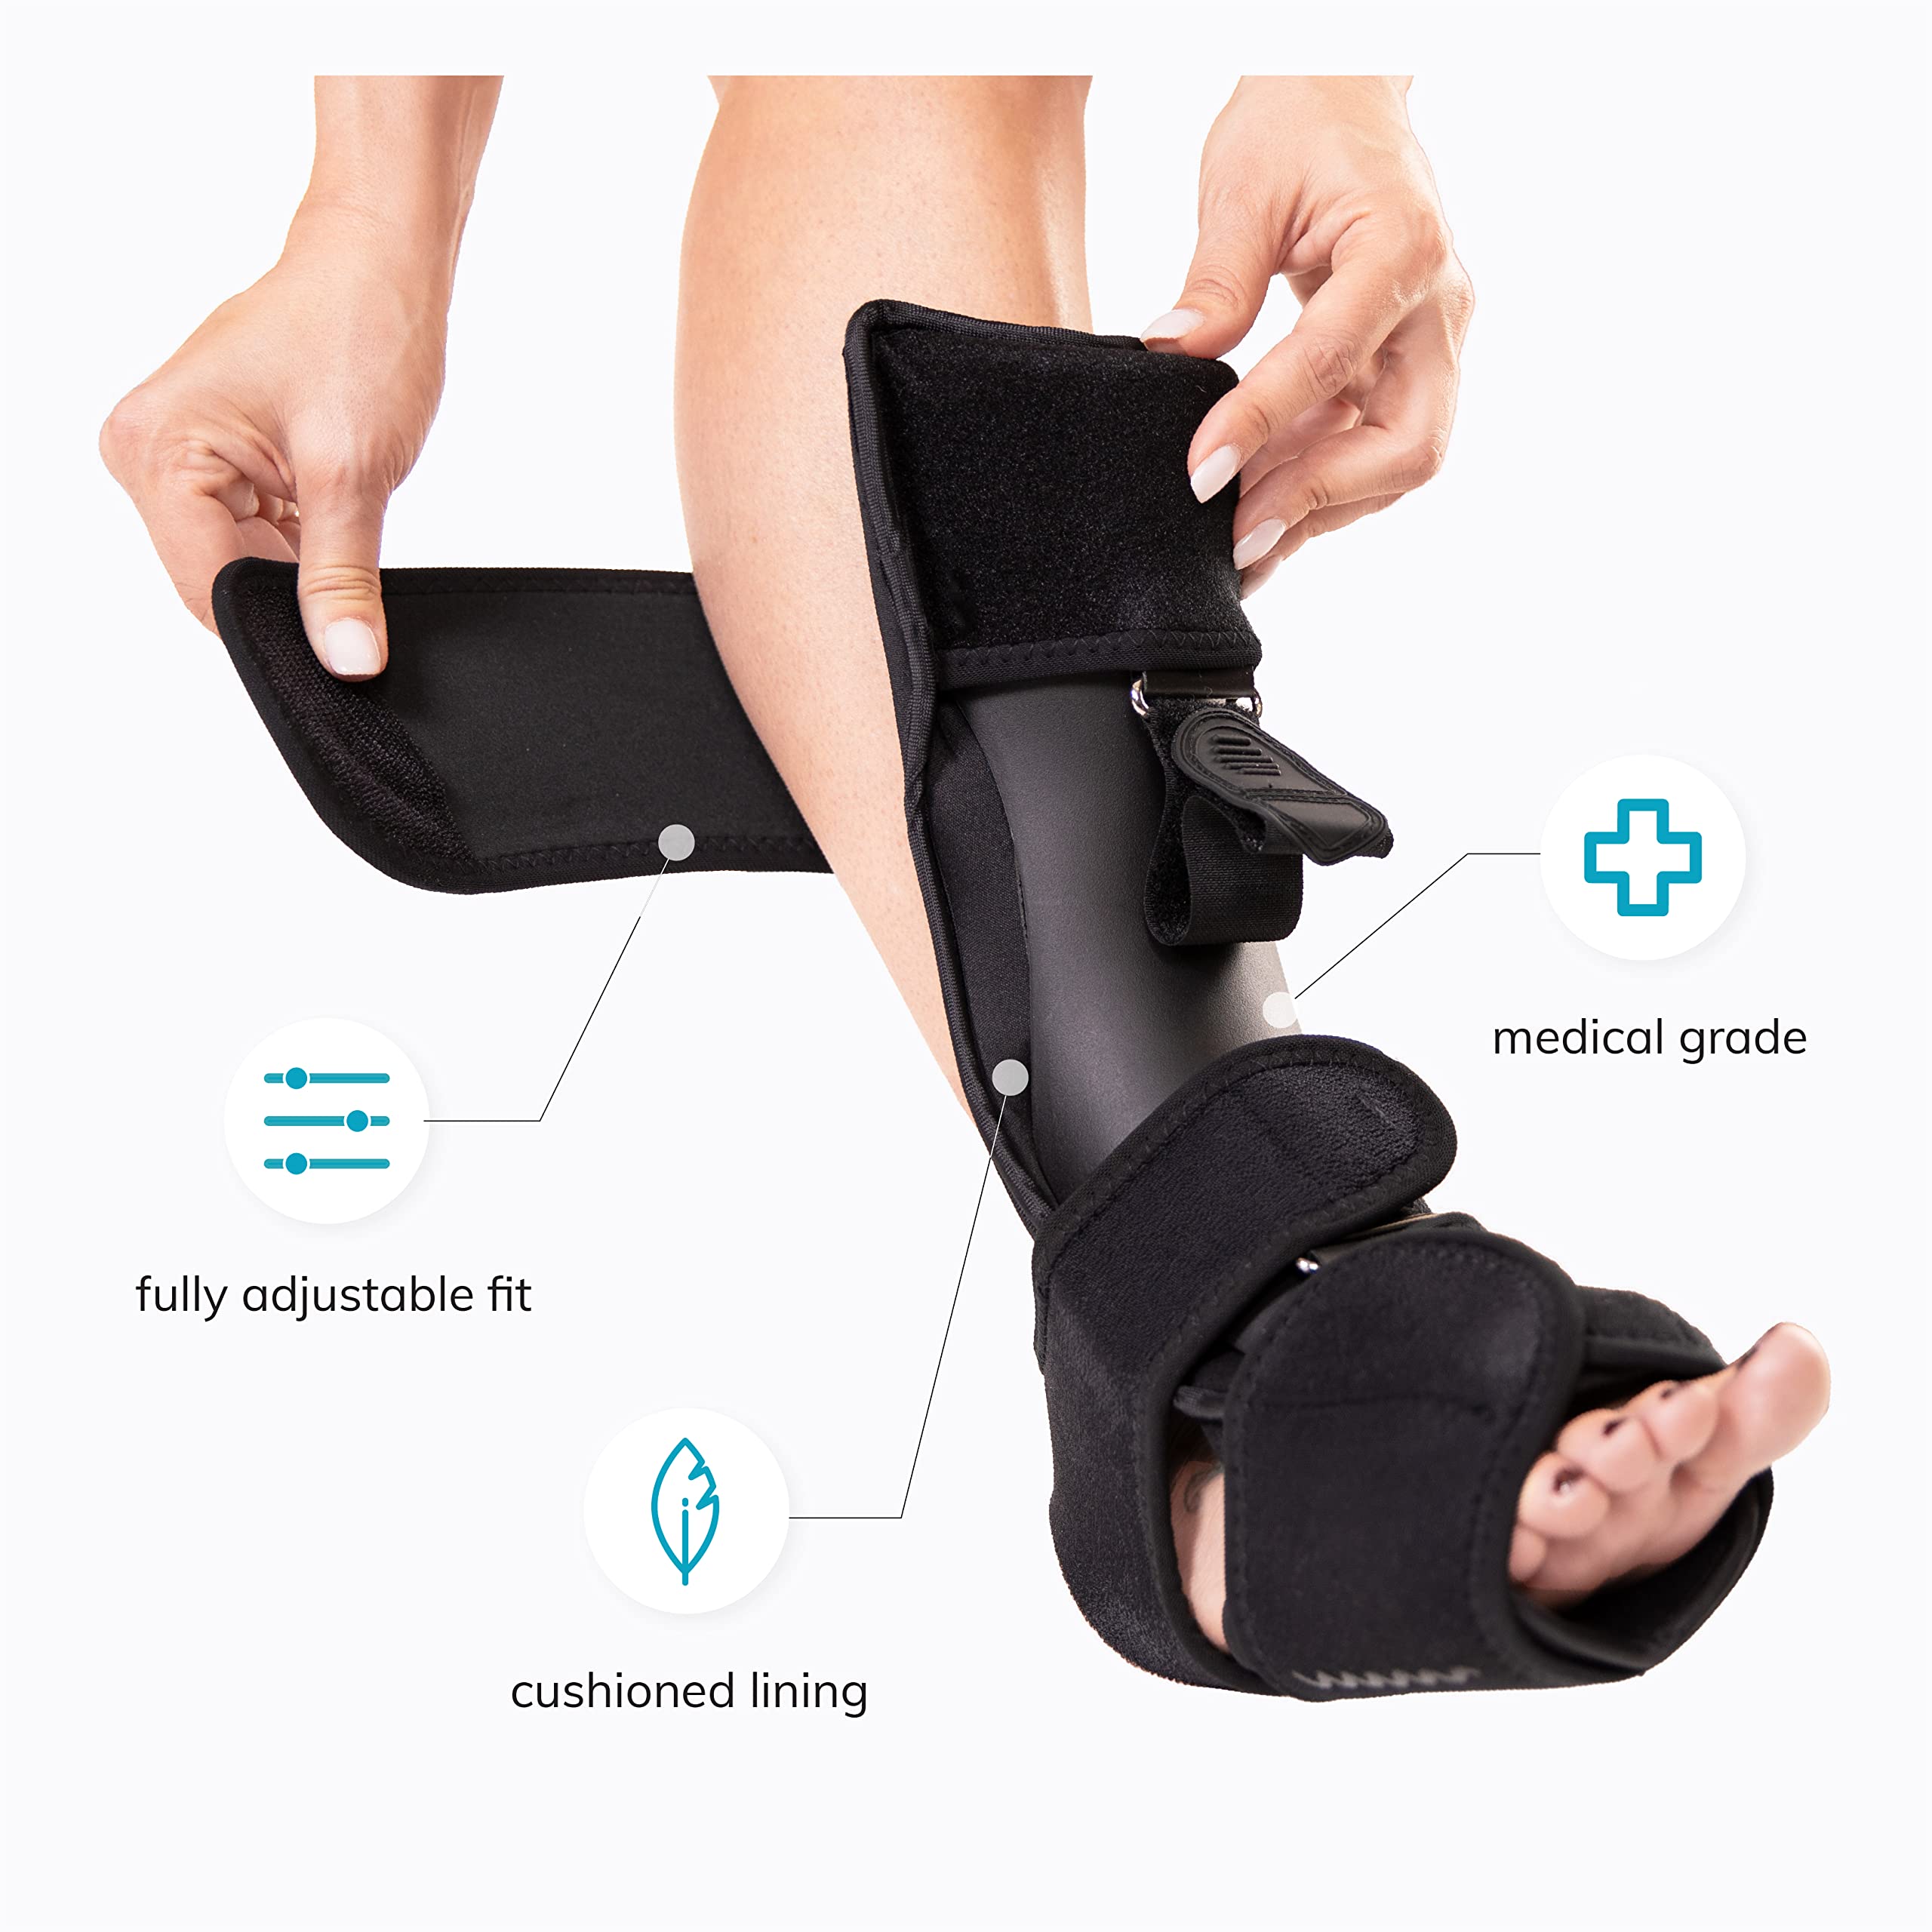 BraceAbility Plantar Fasciitis Brace - New 2022 Dorsal Night Splint Upgrade for Achilles Tendonitis Treatment, Fascia and Calf Stretching, PF Tear Heel and Arch Pain Relief, Drop Foot Support (L/XL)